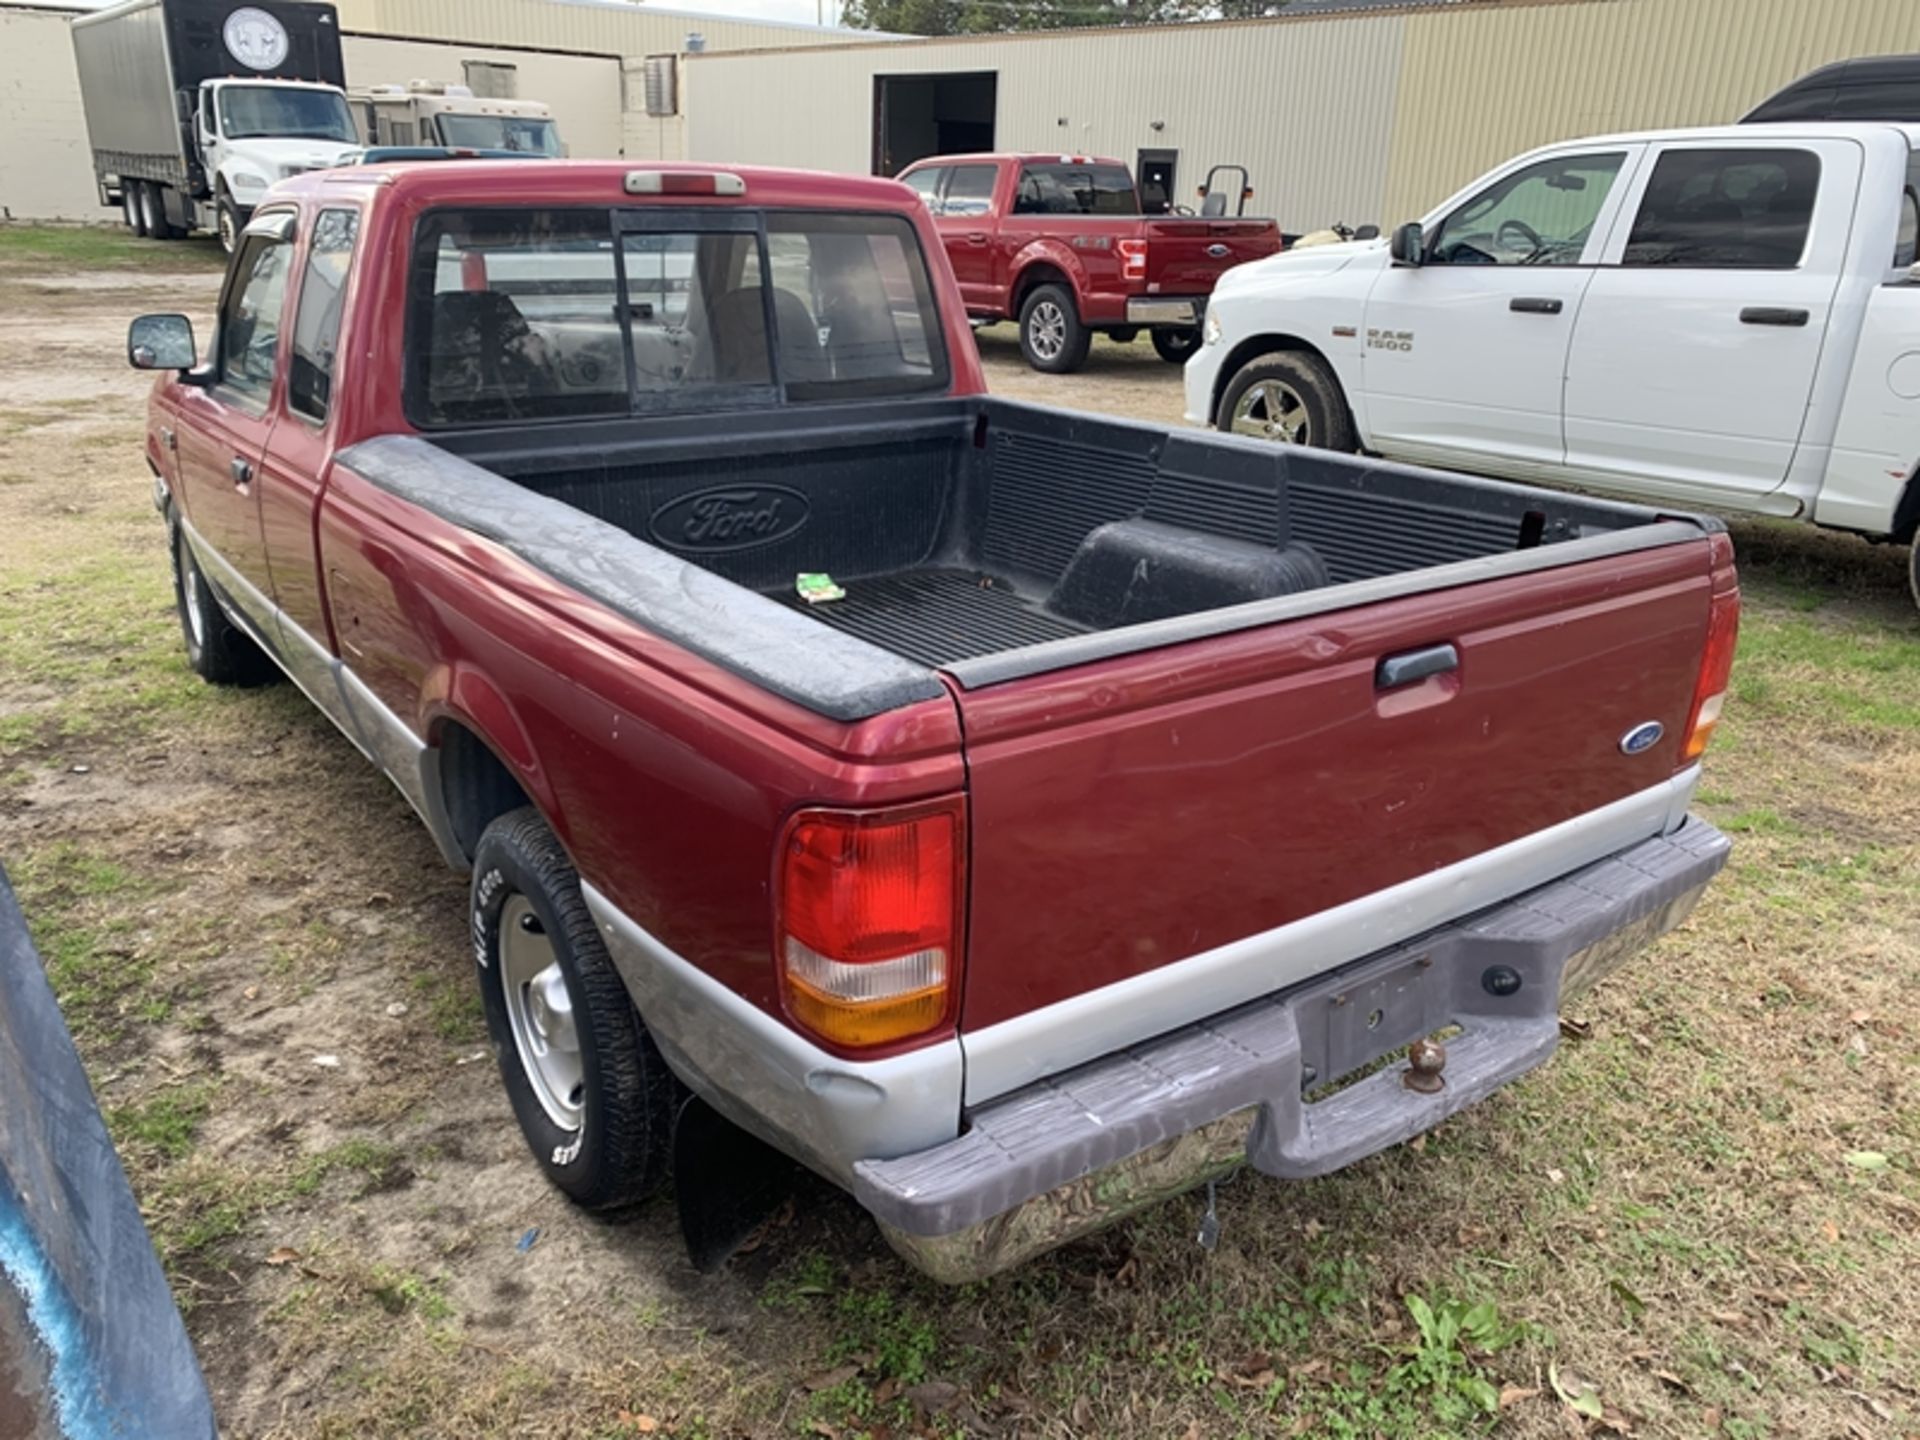 1995 FORD Ranger XLT - 136,915 miles showing - 1FTCR14U1STA06218 - Image 4 of 6